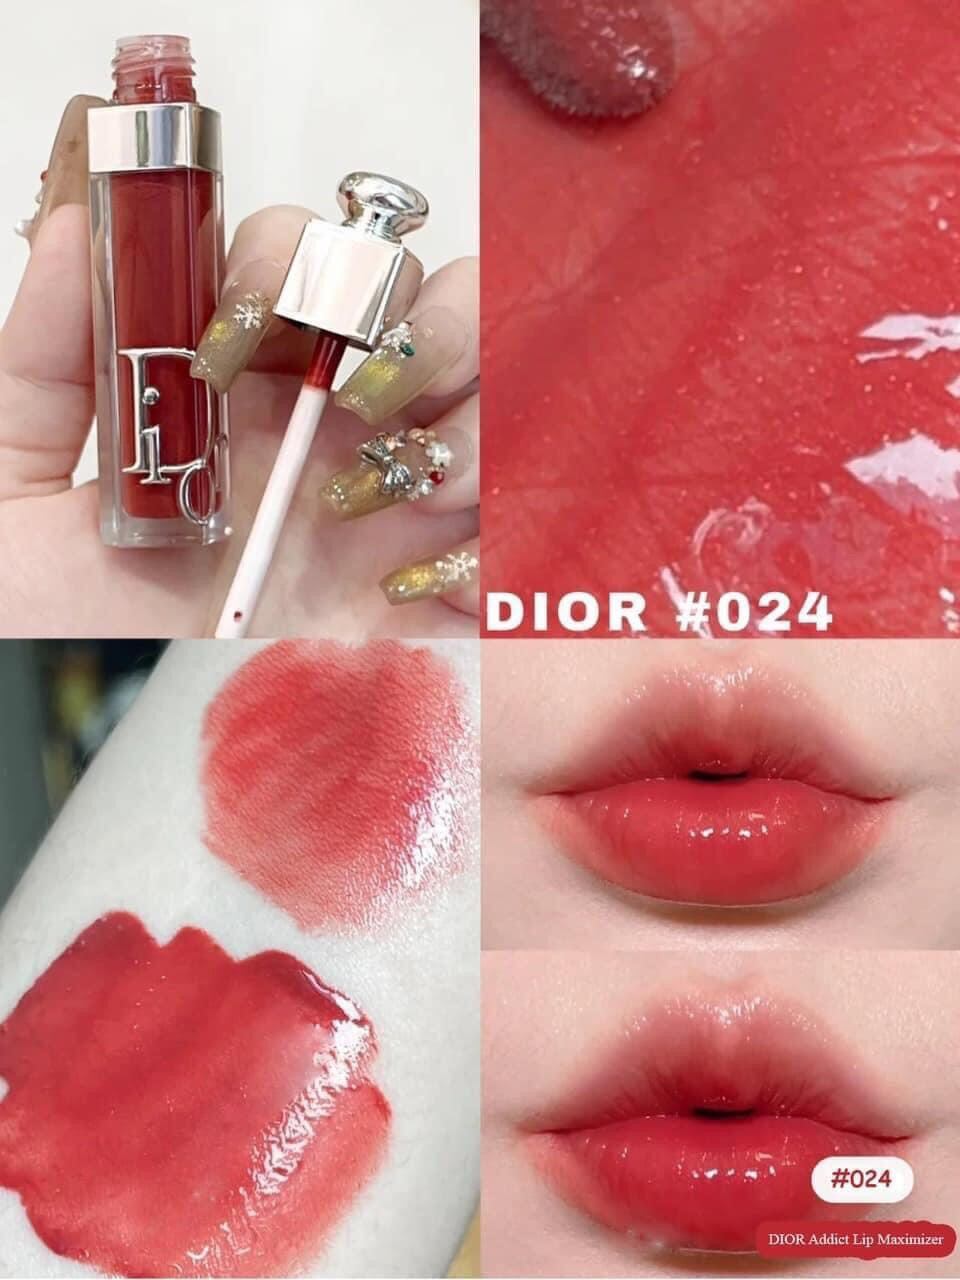 Handson Reviews  on Twitter Swatches of new gorgeous shades of my  RIDE OR DIE for juicy plumped lips the Dior Addict Lip Maximizer  Top  Row L to R  Raspberry 